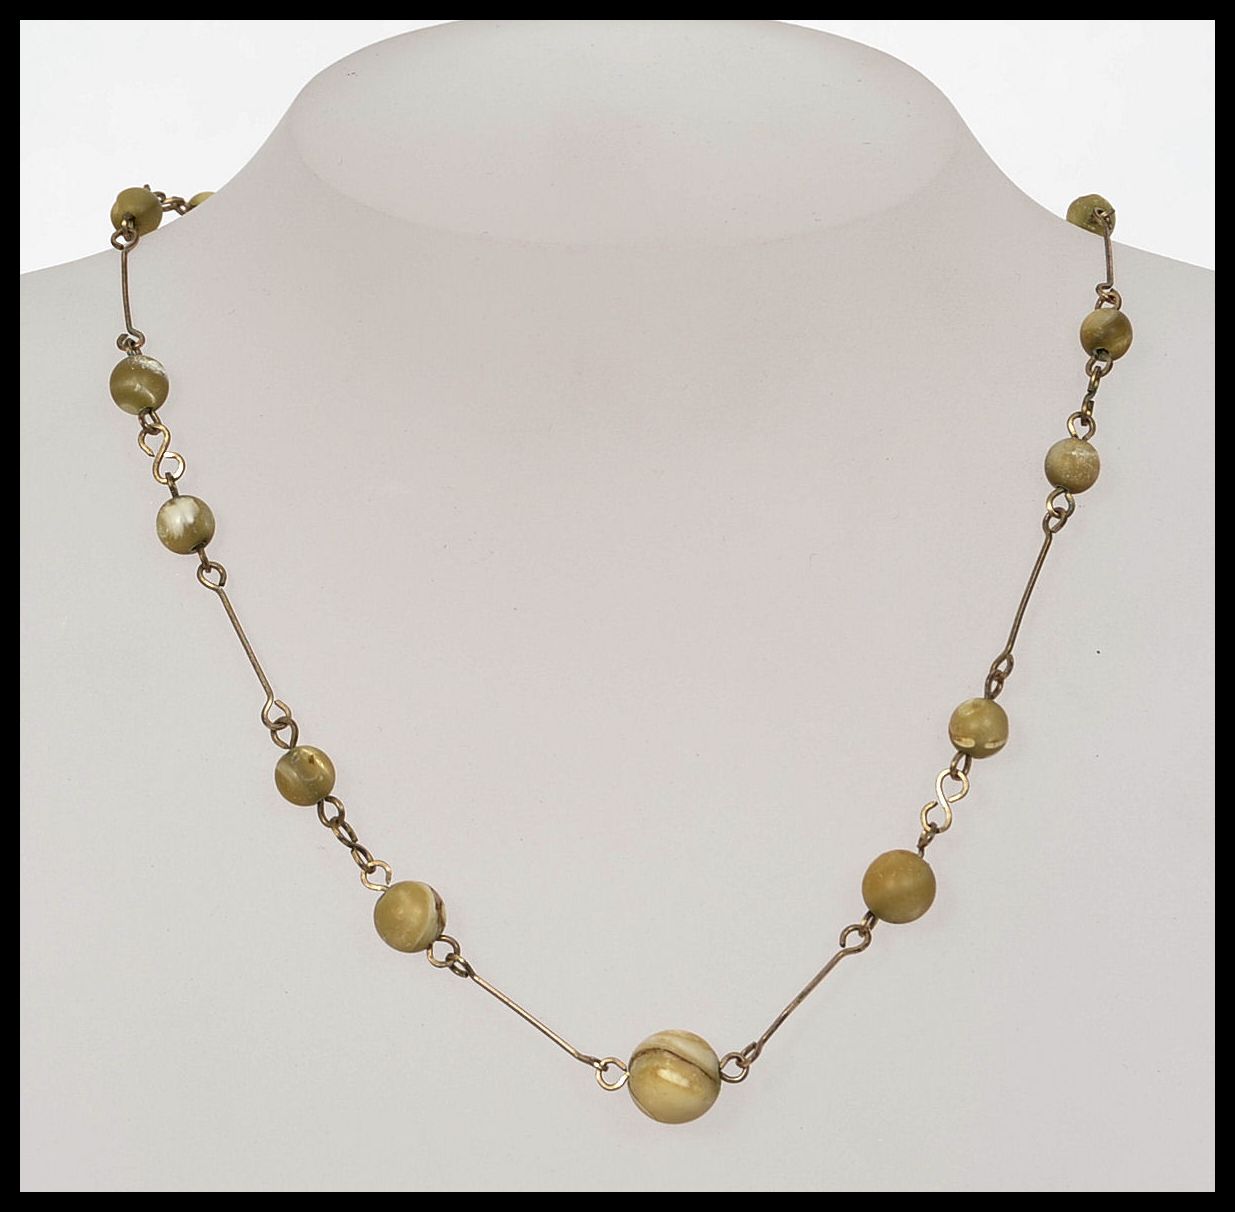 A 1930s Czech  rolled gold necklace with